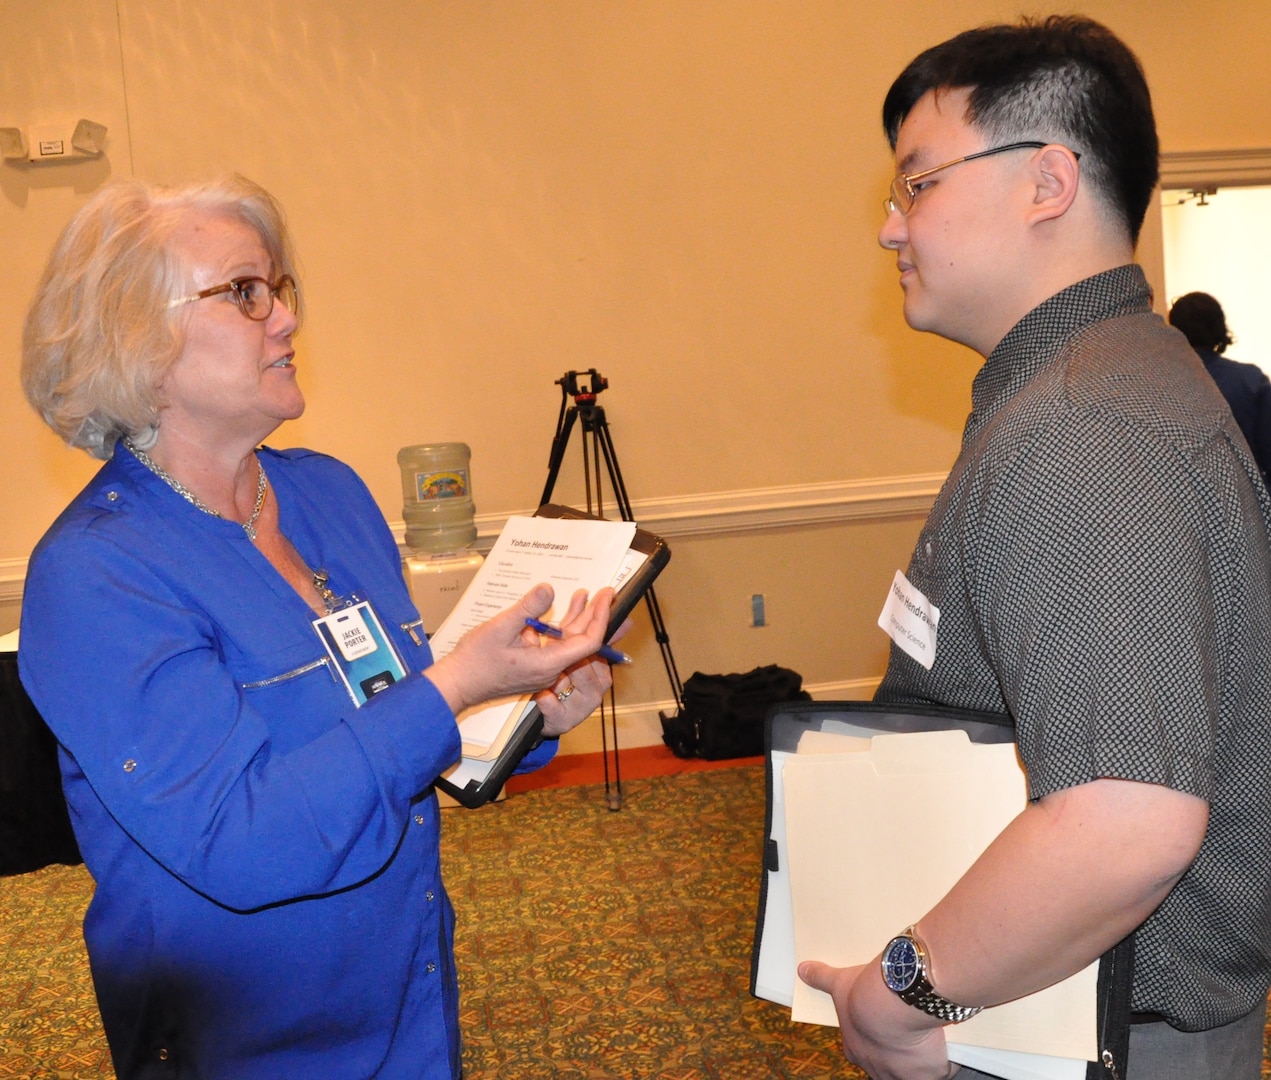 IMAGE: FREDERICKSBURG, Va. (Feb. 5, 2019) - A Naval Surface Warfare Center Dahlgren Division (NSWCDD) representative discusses career opportunities with a candidate at the NSWCDD Career Fair. The command made 36 on-the-spot job offers at the event held in the Fredericksburg Expo and Conference Center. "This is the first year that we opened the event up to non-science and engineering positions and we had an overwhelming response for our contract, financial, and information technology positions," said Shelby Khan, the NSWCDD Human Resources Recruiting Program lead. "We anticipate additional interviews and offers resulting from the career fair in the weeks to come."